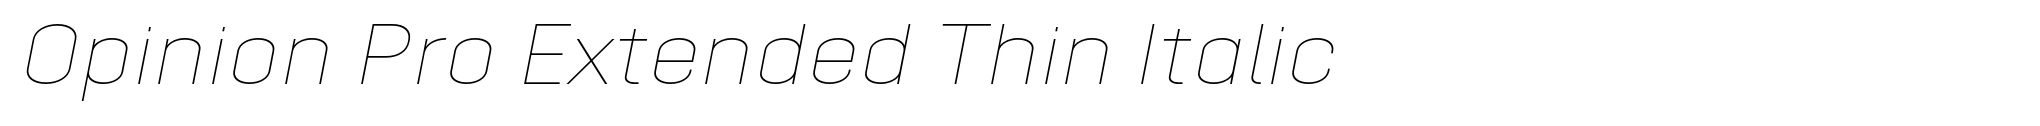 Opinion Pro Extended Thin Italic image